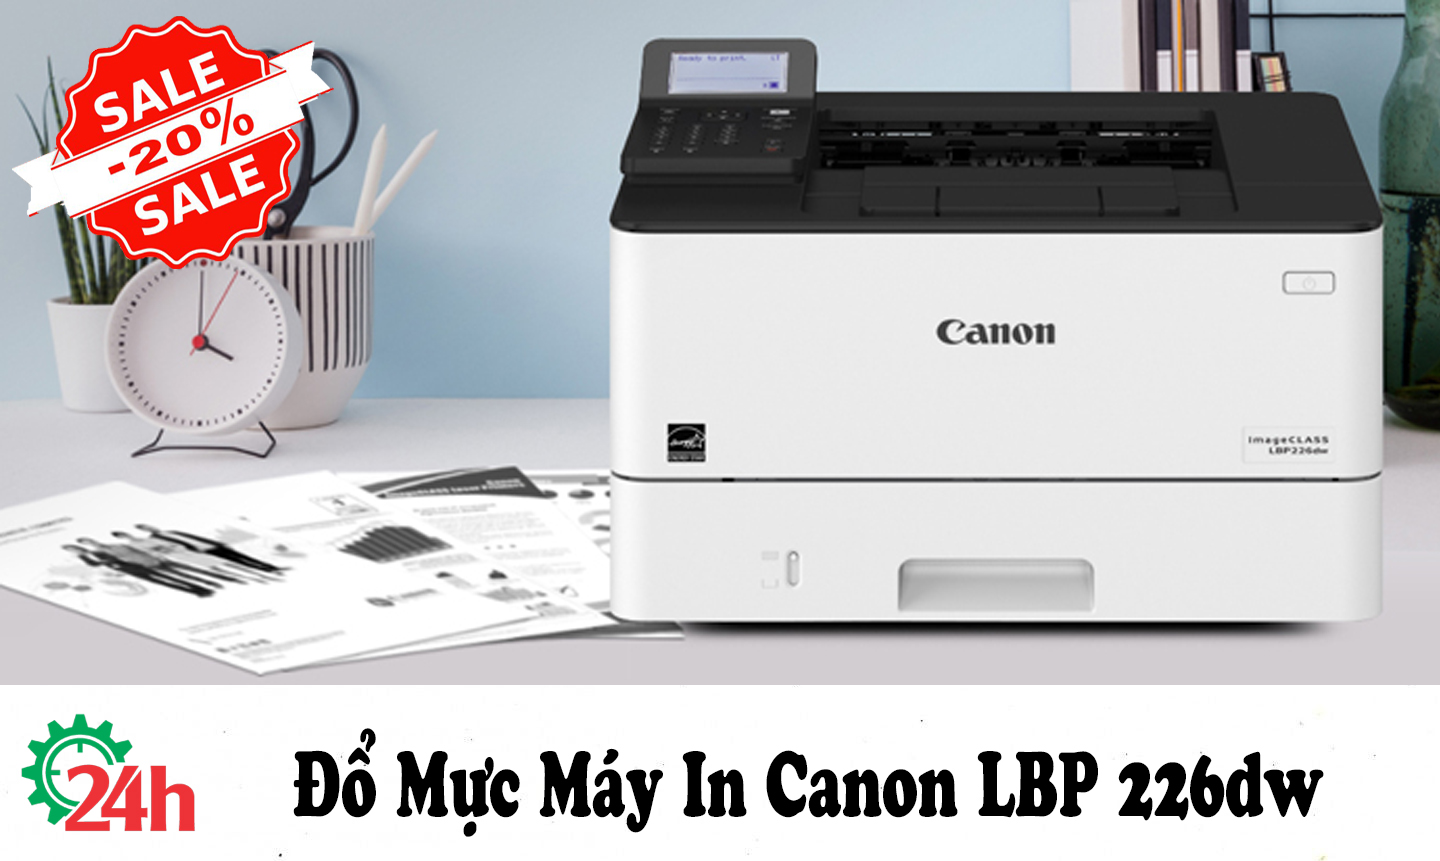 do-muc-may-in-canon-lbp-226dw